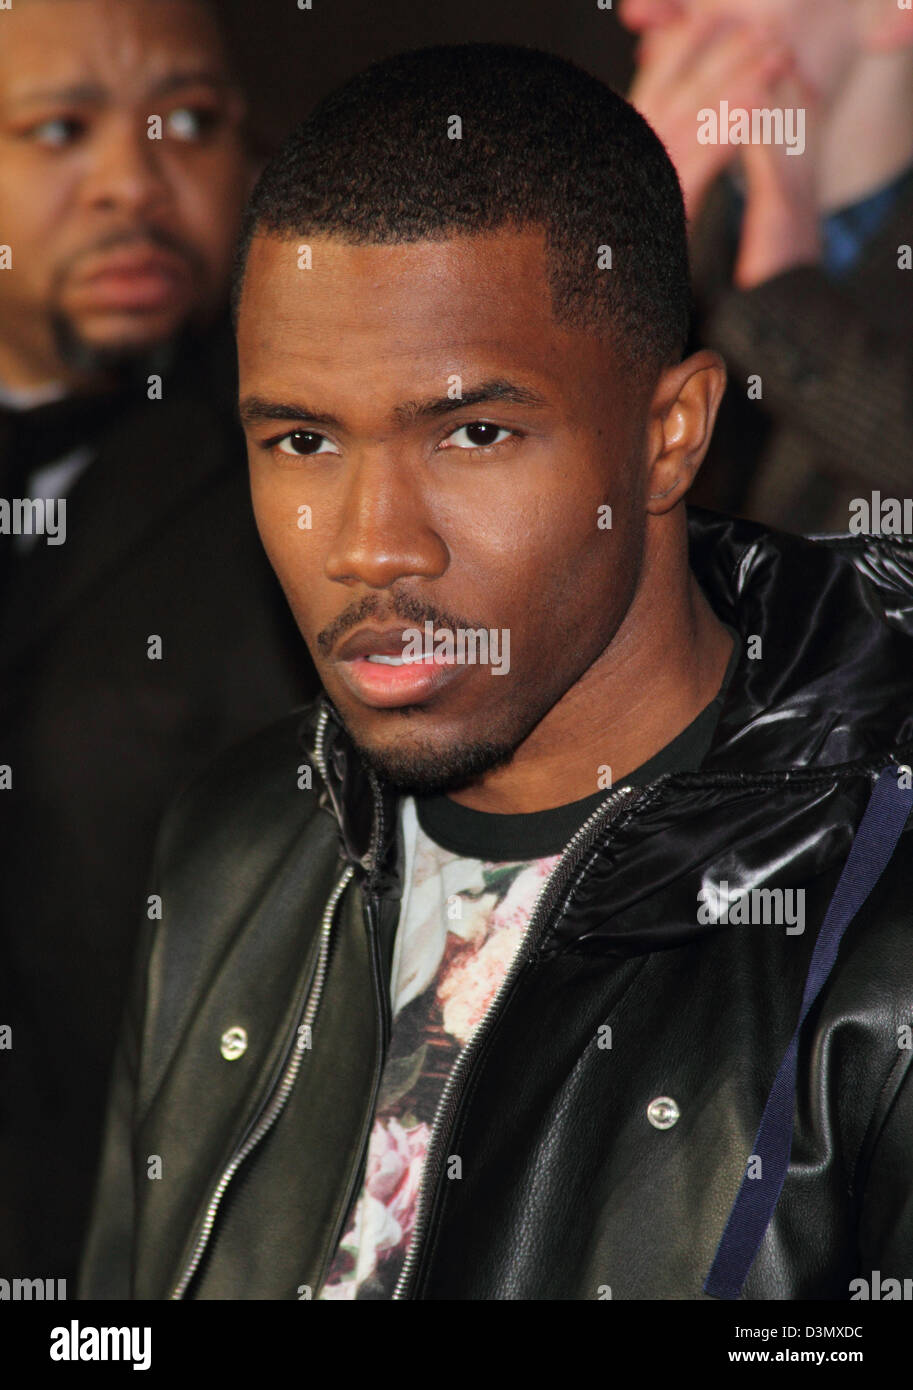 London, UK. 20th February 2013. Frank Ocean at the The 2013 Brit Awards at the O2 Arena, London - February 20th 2013  Photo by Keith Mayhew/ Alamy Live News Stock Photo